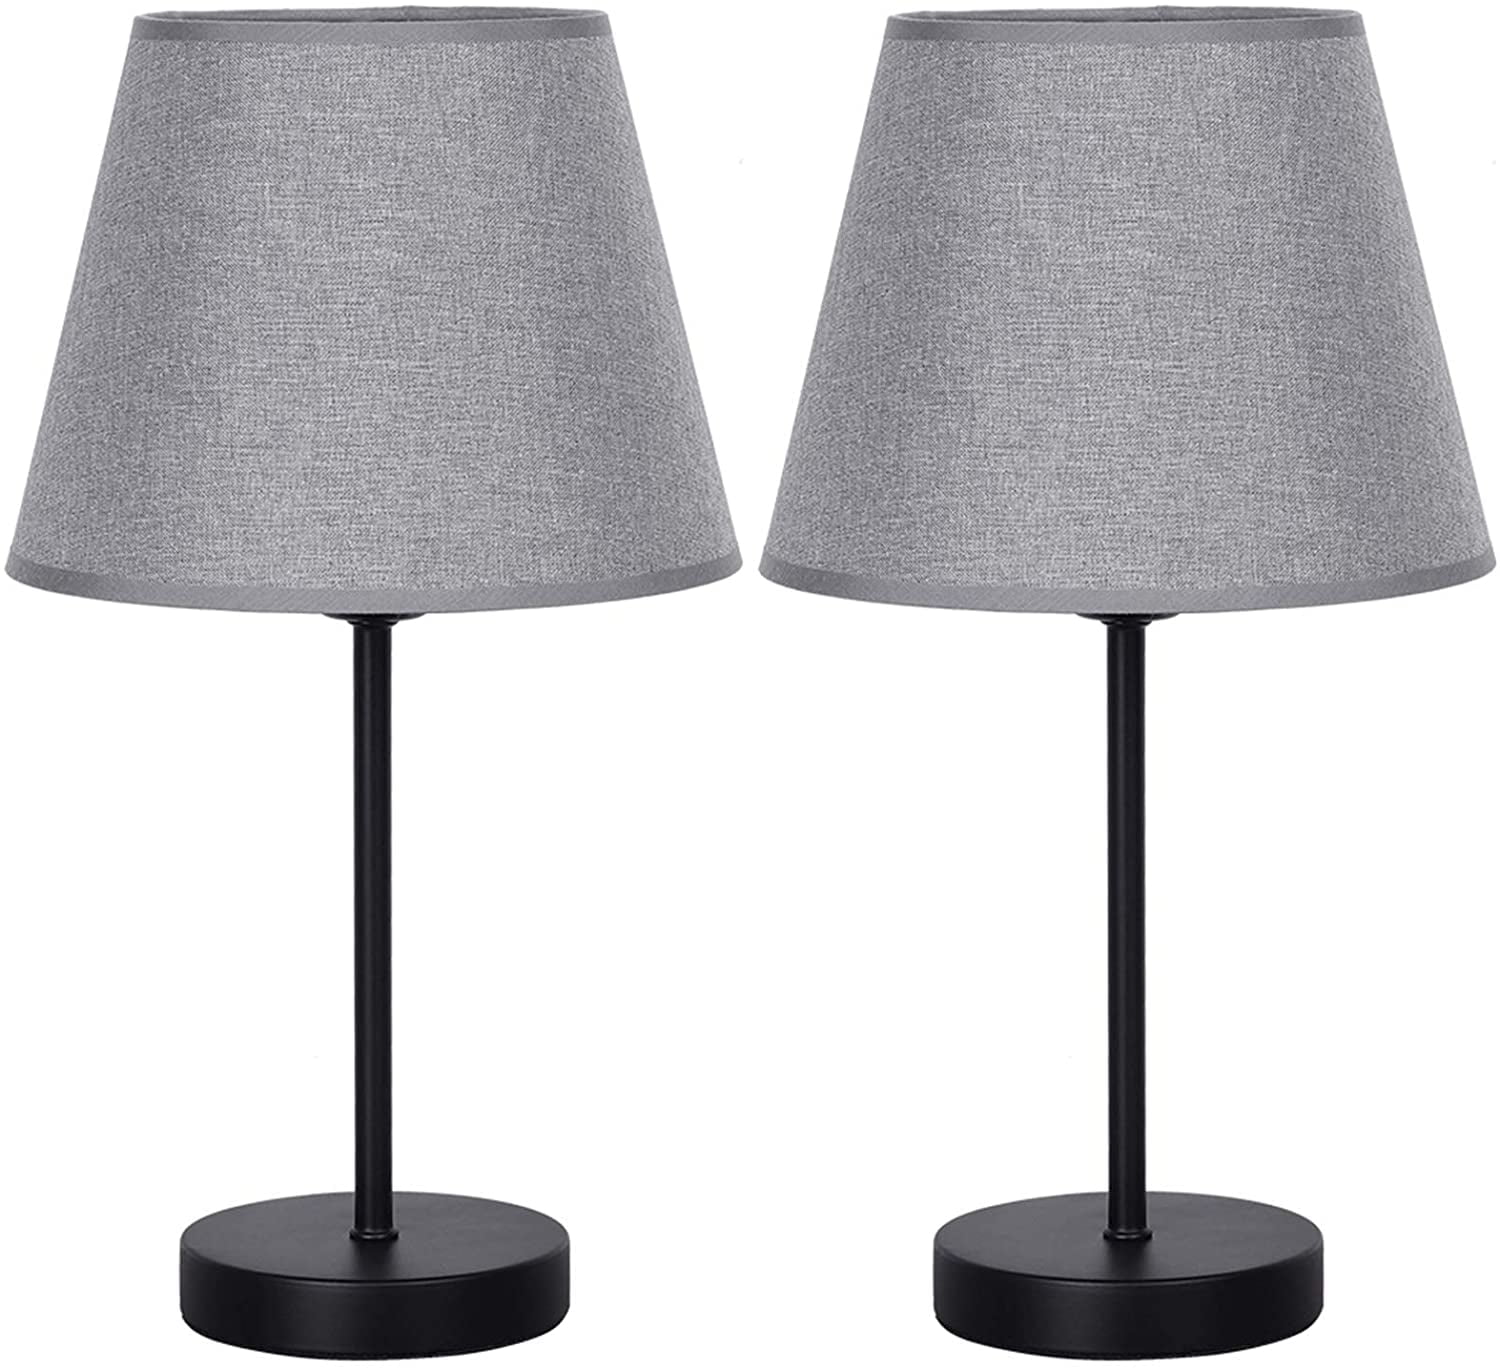 Pair of Touch Table Lamps for bedside tables super white and chrome 